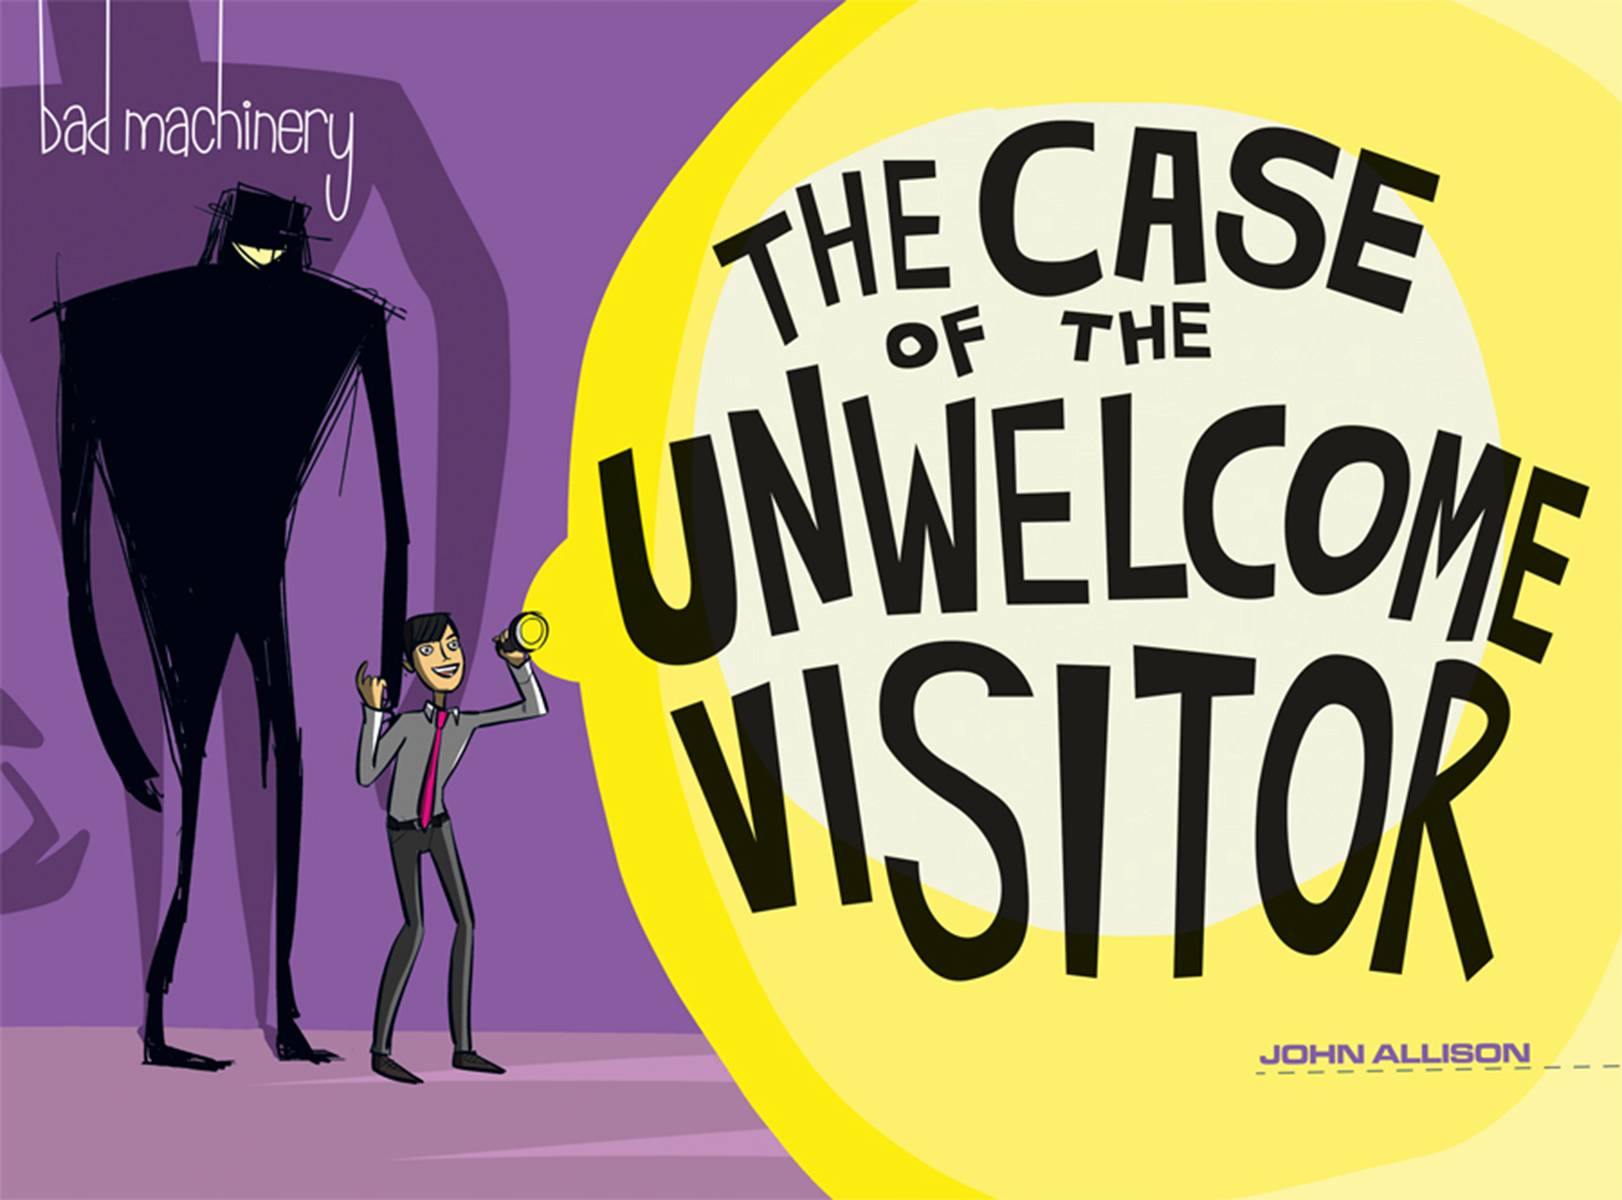 Bad Machinery Graphic Novel Volume 6 the Case of the Unwelcome Visitor